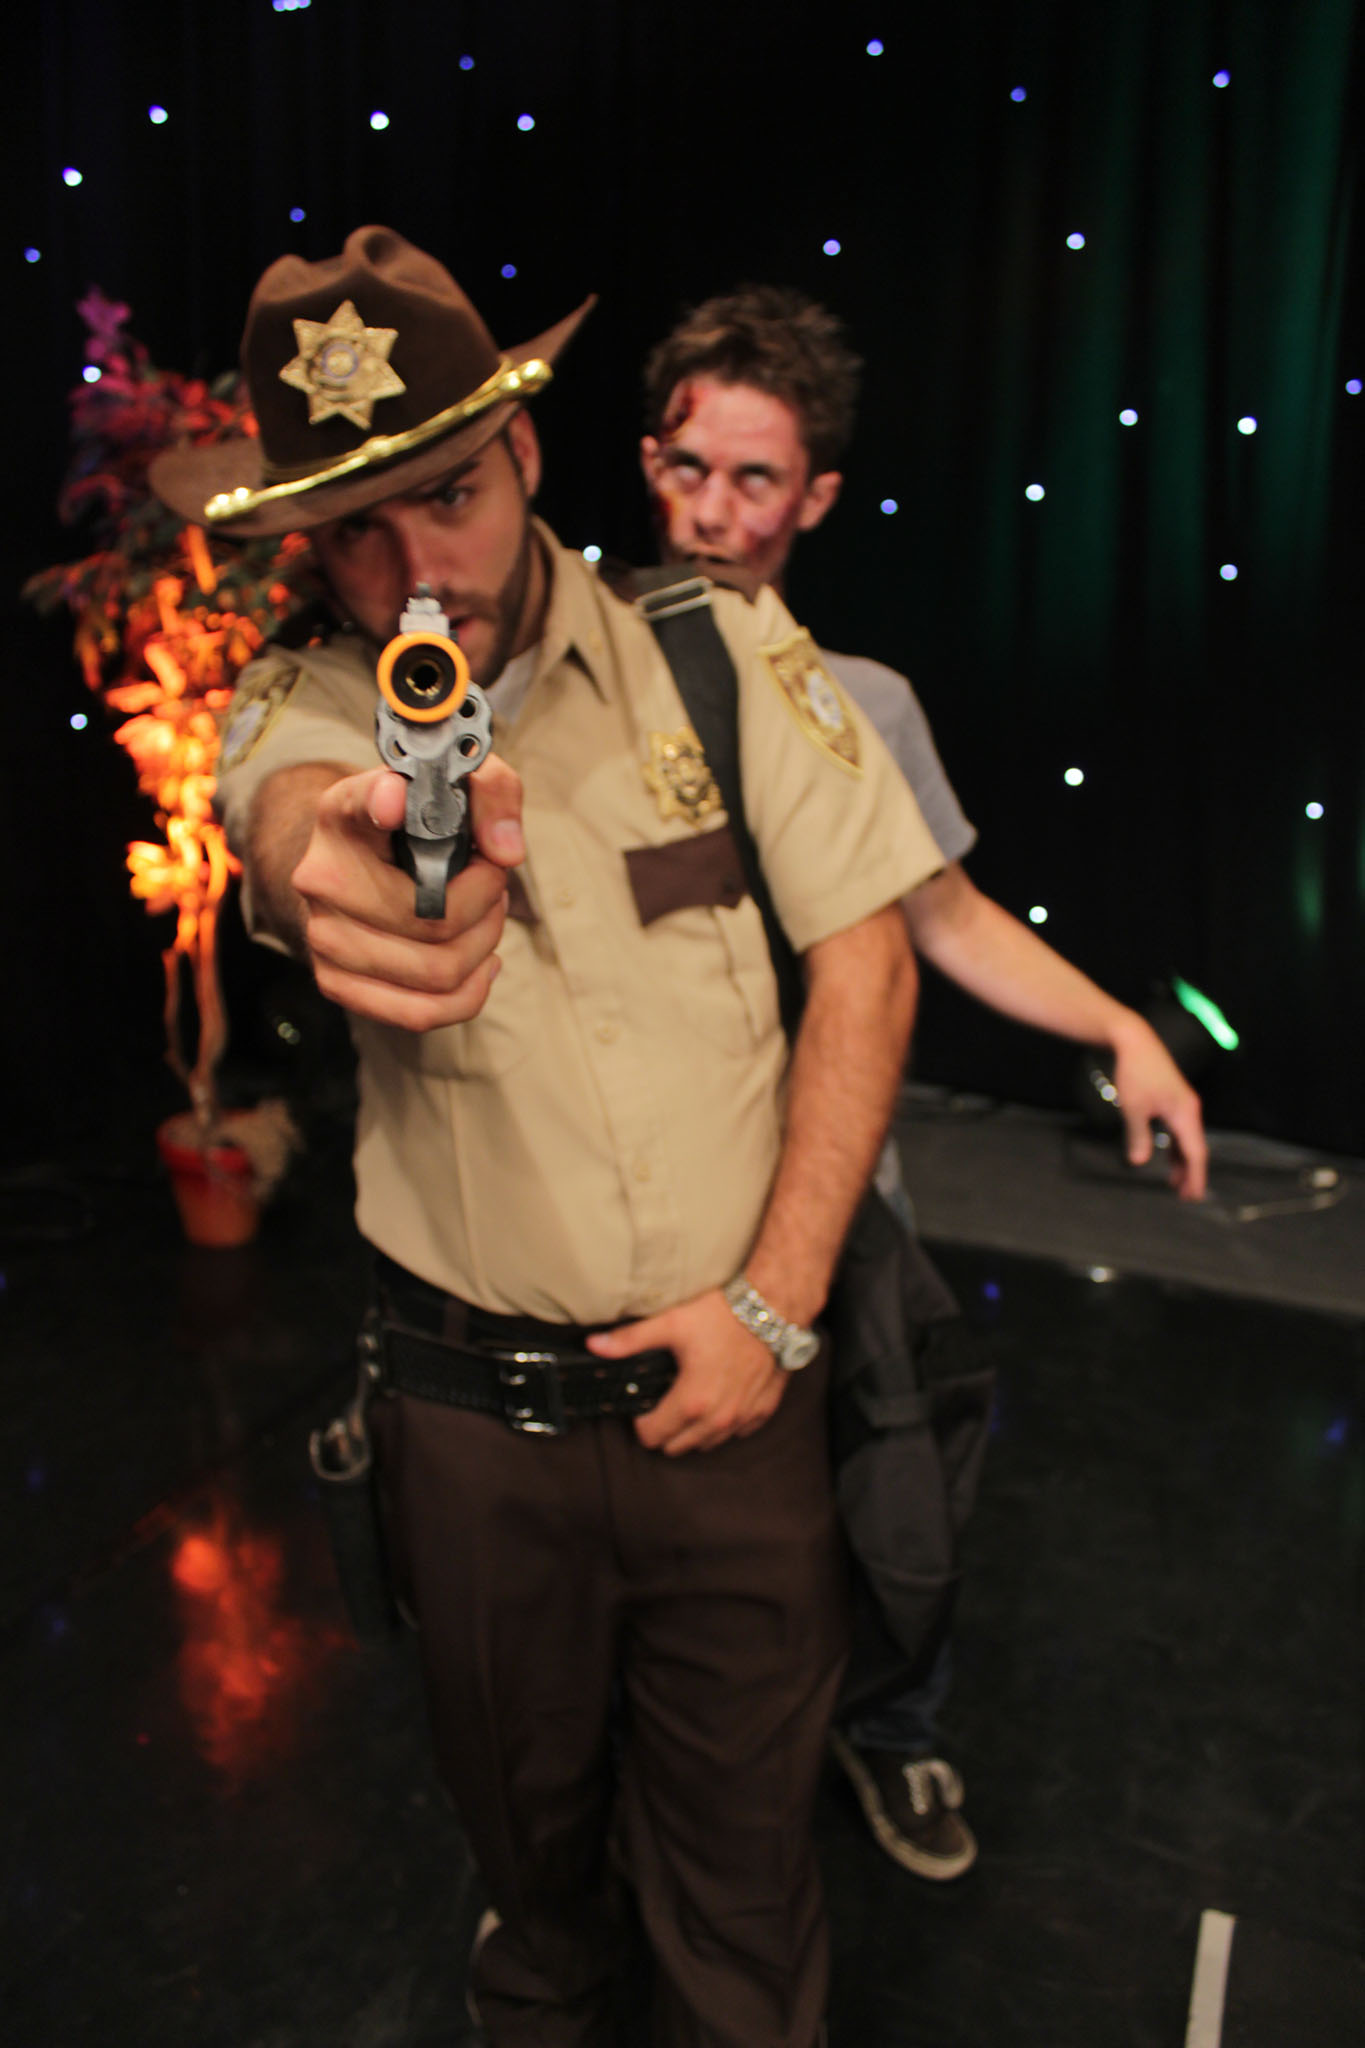 Look out, Sheriff!